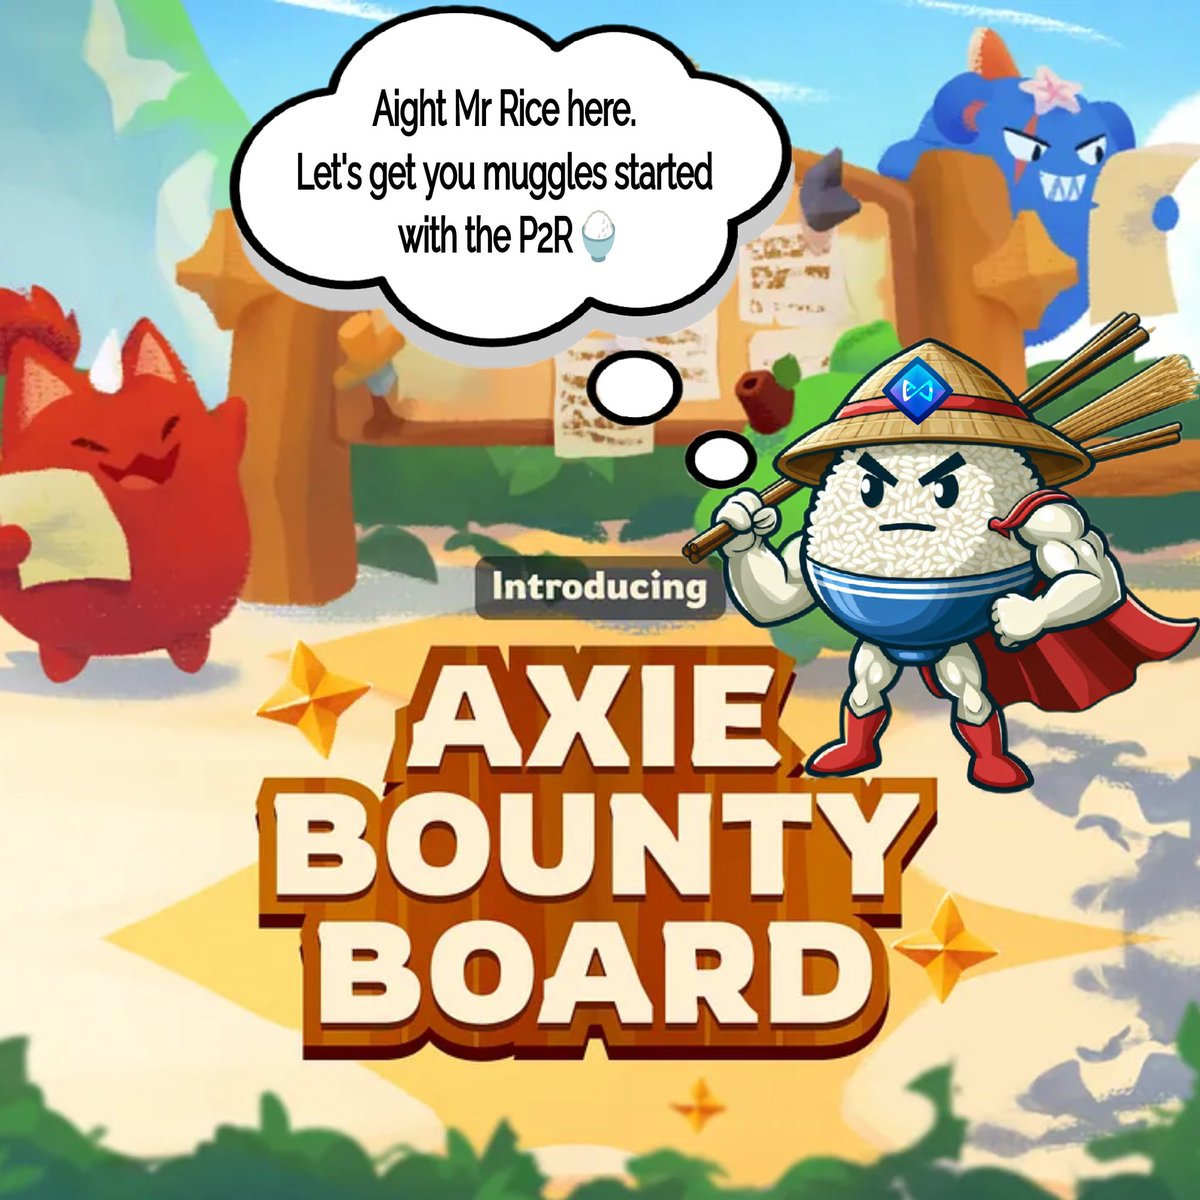 In case you still don't know there's a new movement inside the Axie ecosystem called 'The Axie Bounty Board'. Today we'll have the help of our lovely friend Mr. Rice to walk us through everything about it. Just one thing, don't make him mad. Aight let's dive in. 🧵